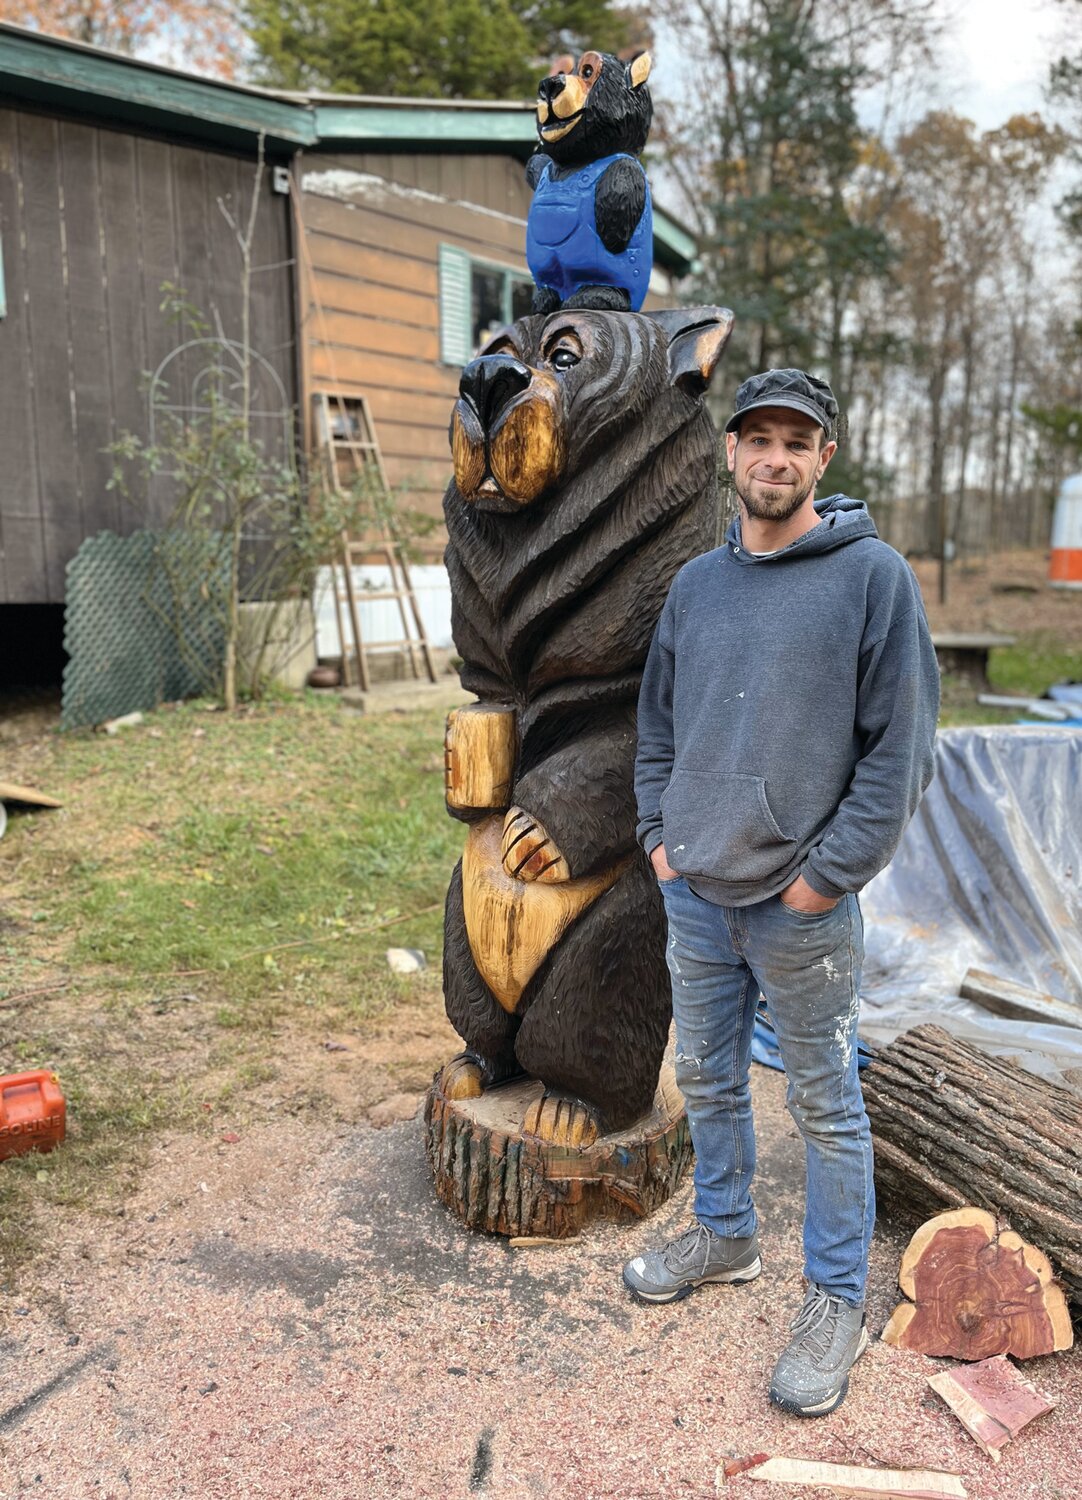 Neil Gross of Tinicum Township, who is proud of his native American ancestry, poses with his chainsaw bears.